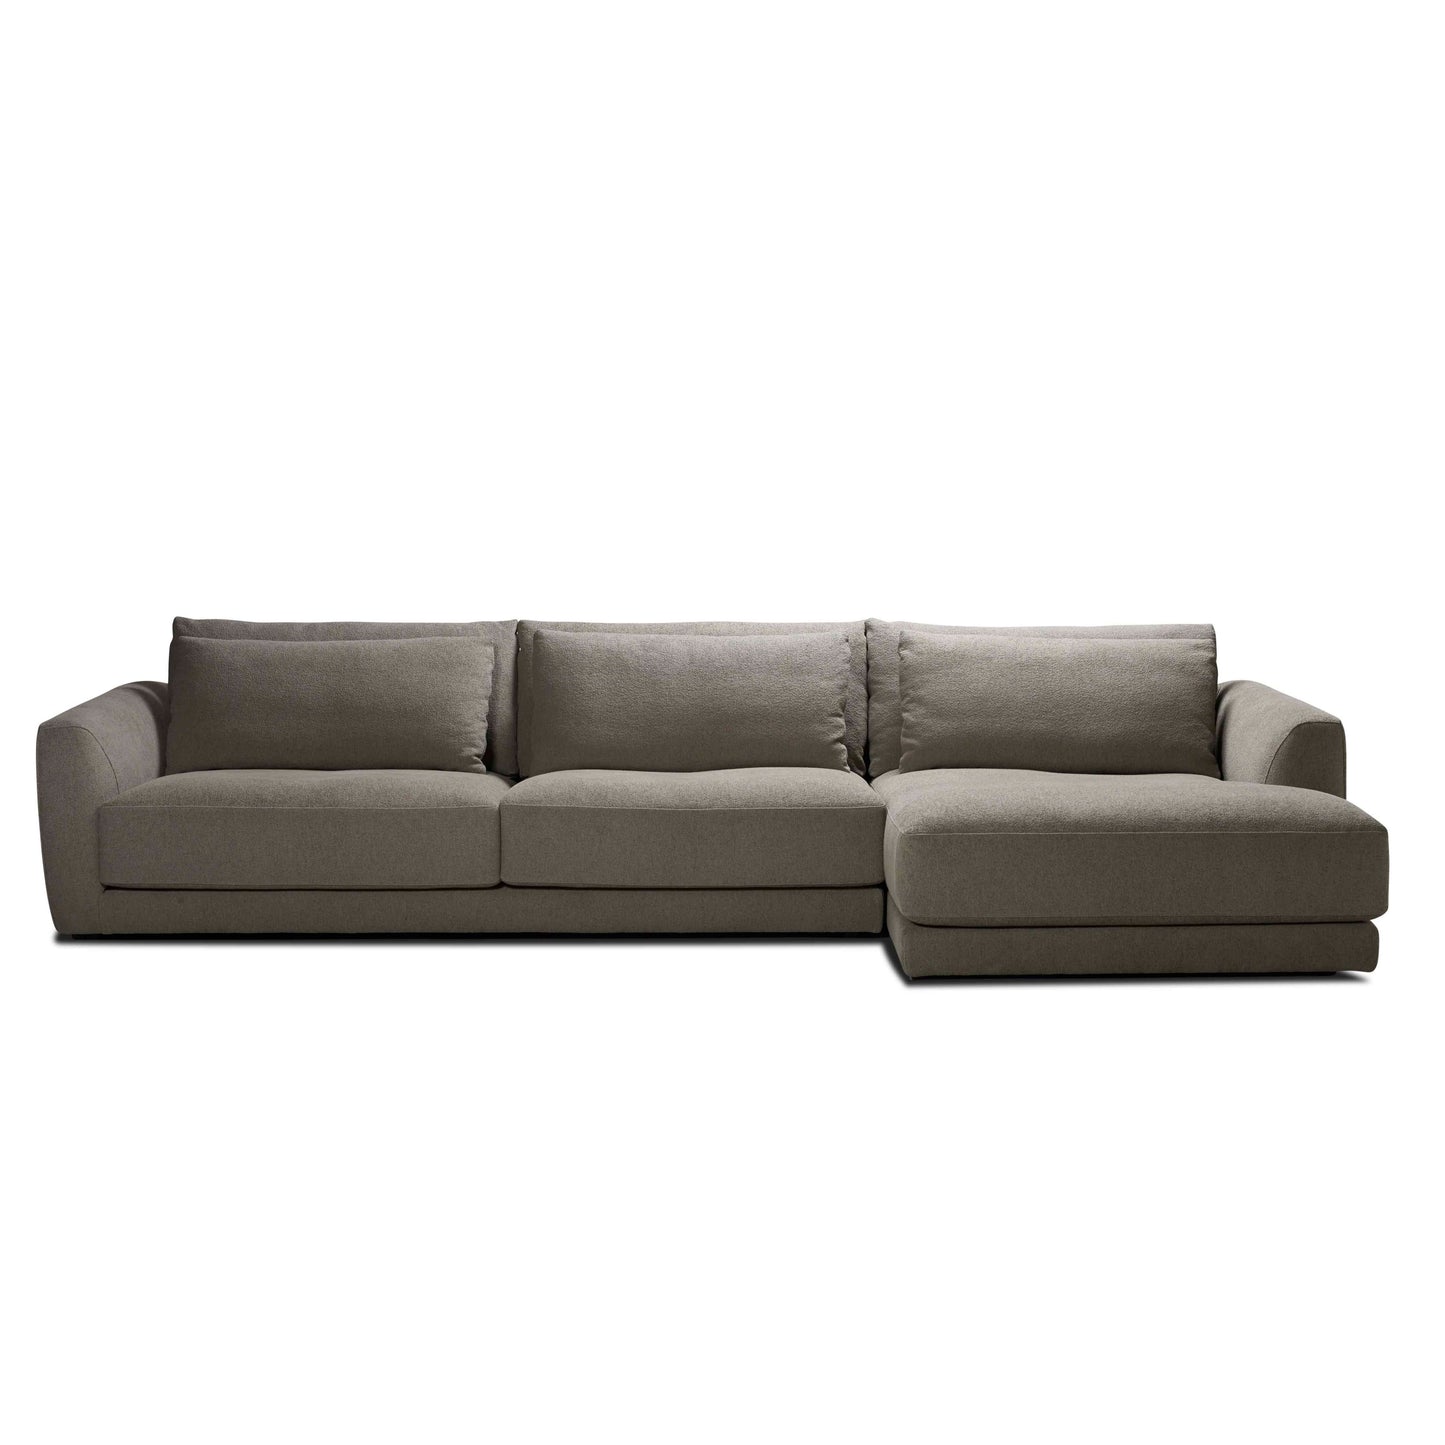 Cypress Sofa by Molmic available from Make Your House A Home, Furniture Store located in Bendigo, Victoria. Australian Made in Melbourne.